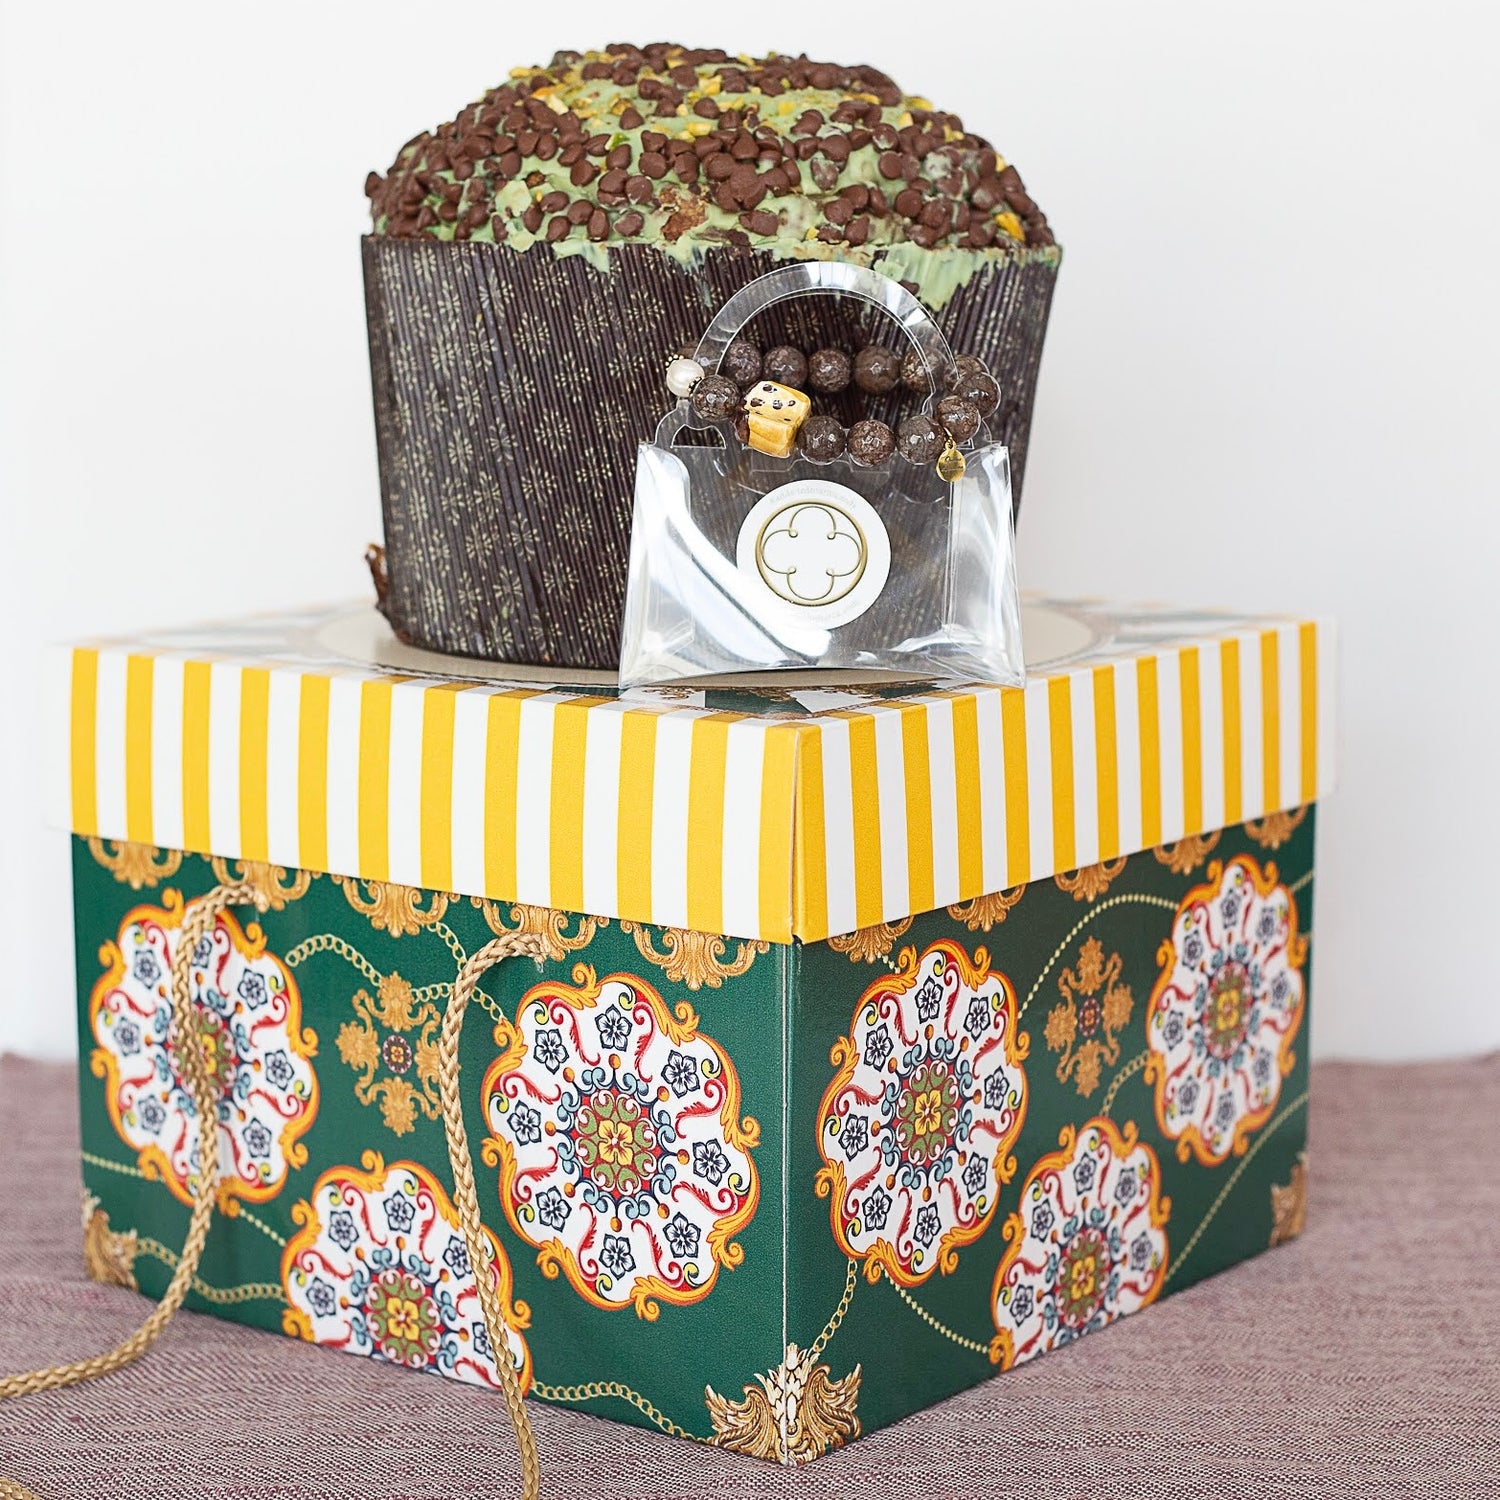 “Flavors of Sicily” Panettone by Settepani Bakery